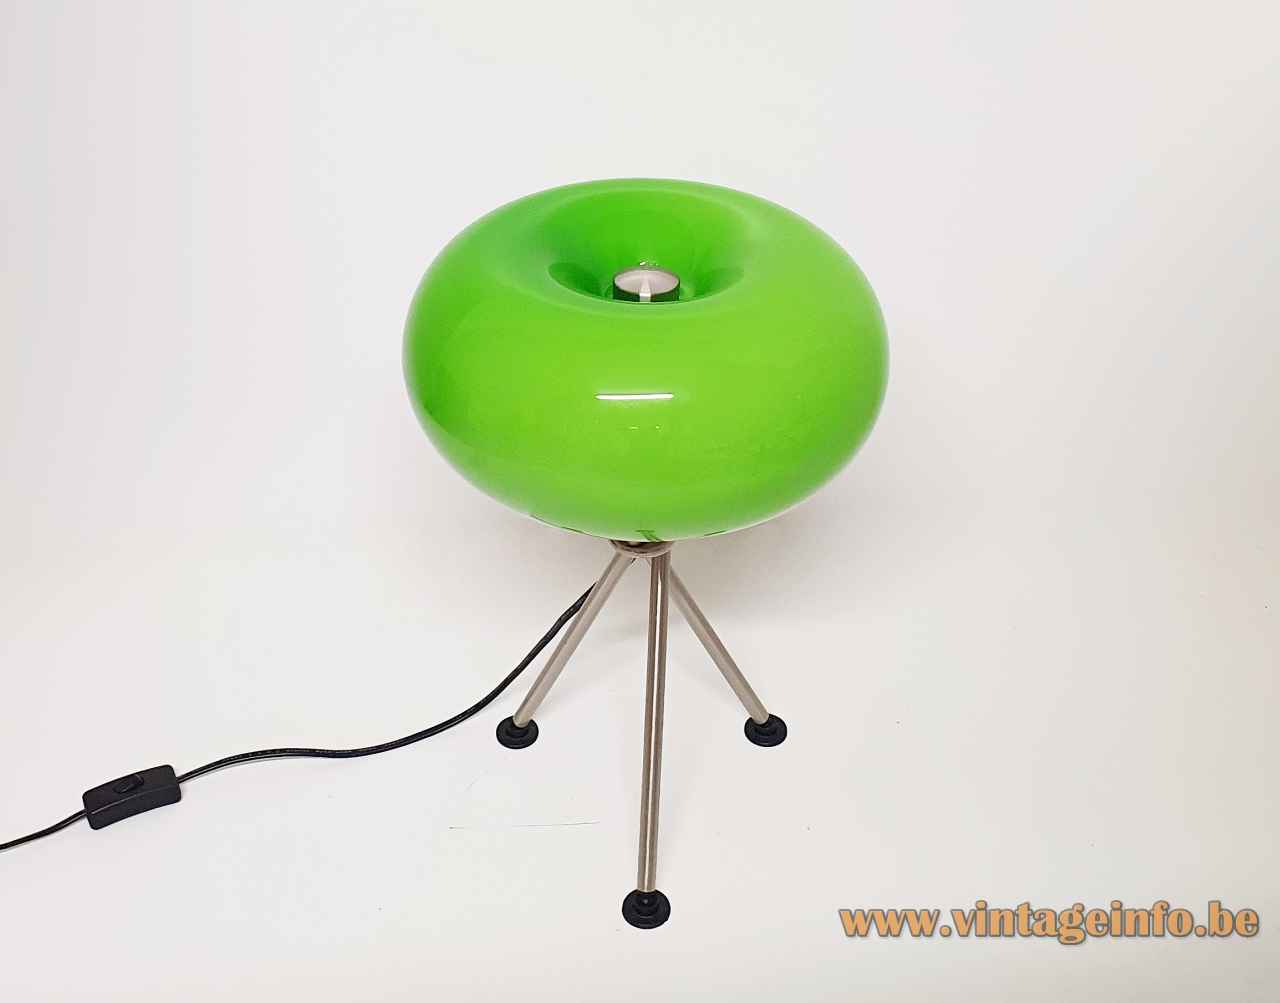 Trio Leuchten green glass table lamp Olympic chrome tripod base oval globe lampshade 1990s 2000s Germany